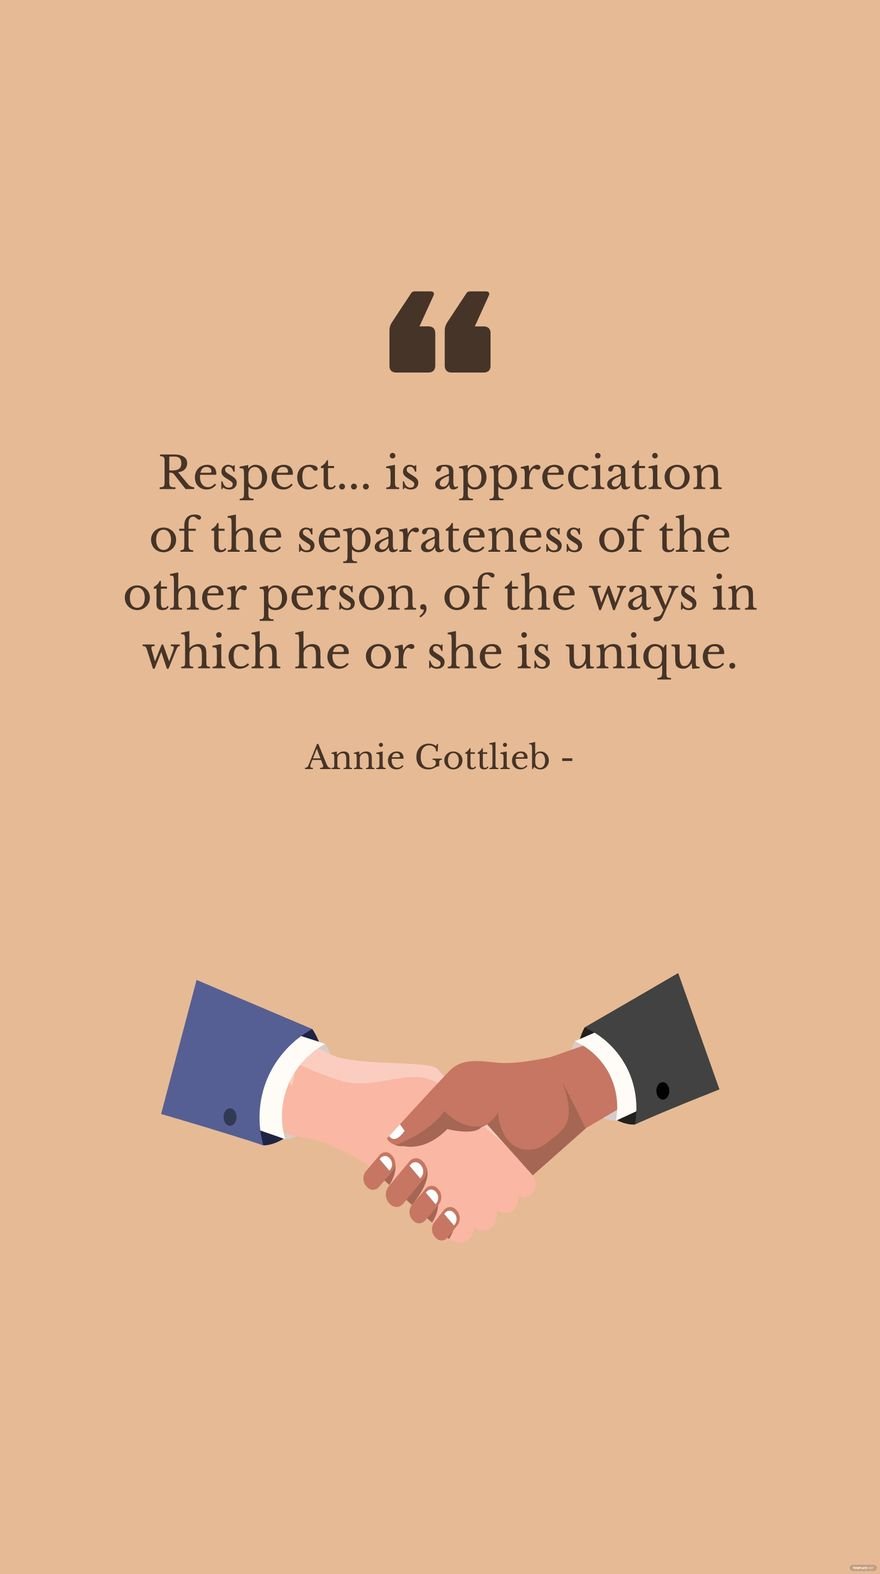 Free Annie Gottlieb - Respect... is appreciation of the separateness of the other person, of the ways in which he or she is unique. in JPG